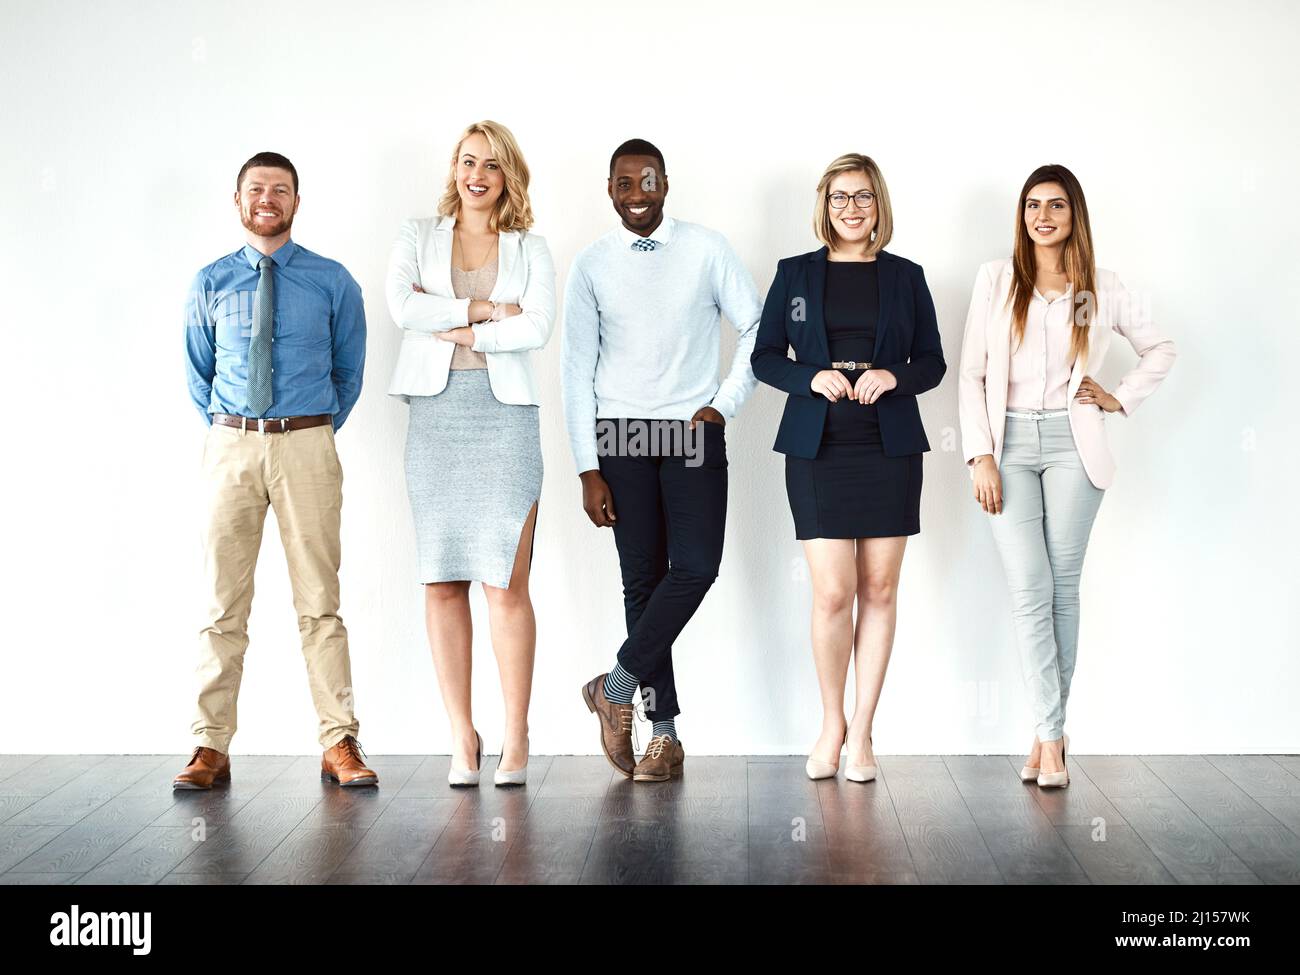 We call the shots. Portrait of a group of work colleagues standing in a line while using their wireless devices against a white background. Stock Photo